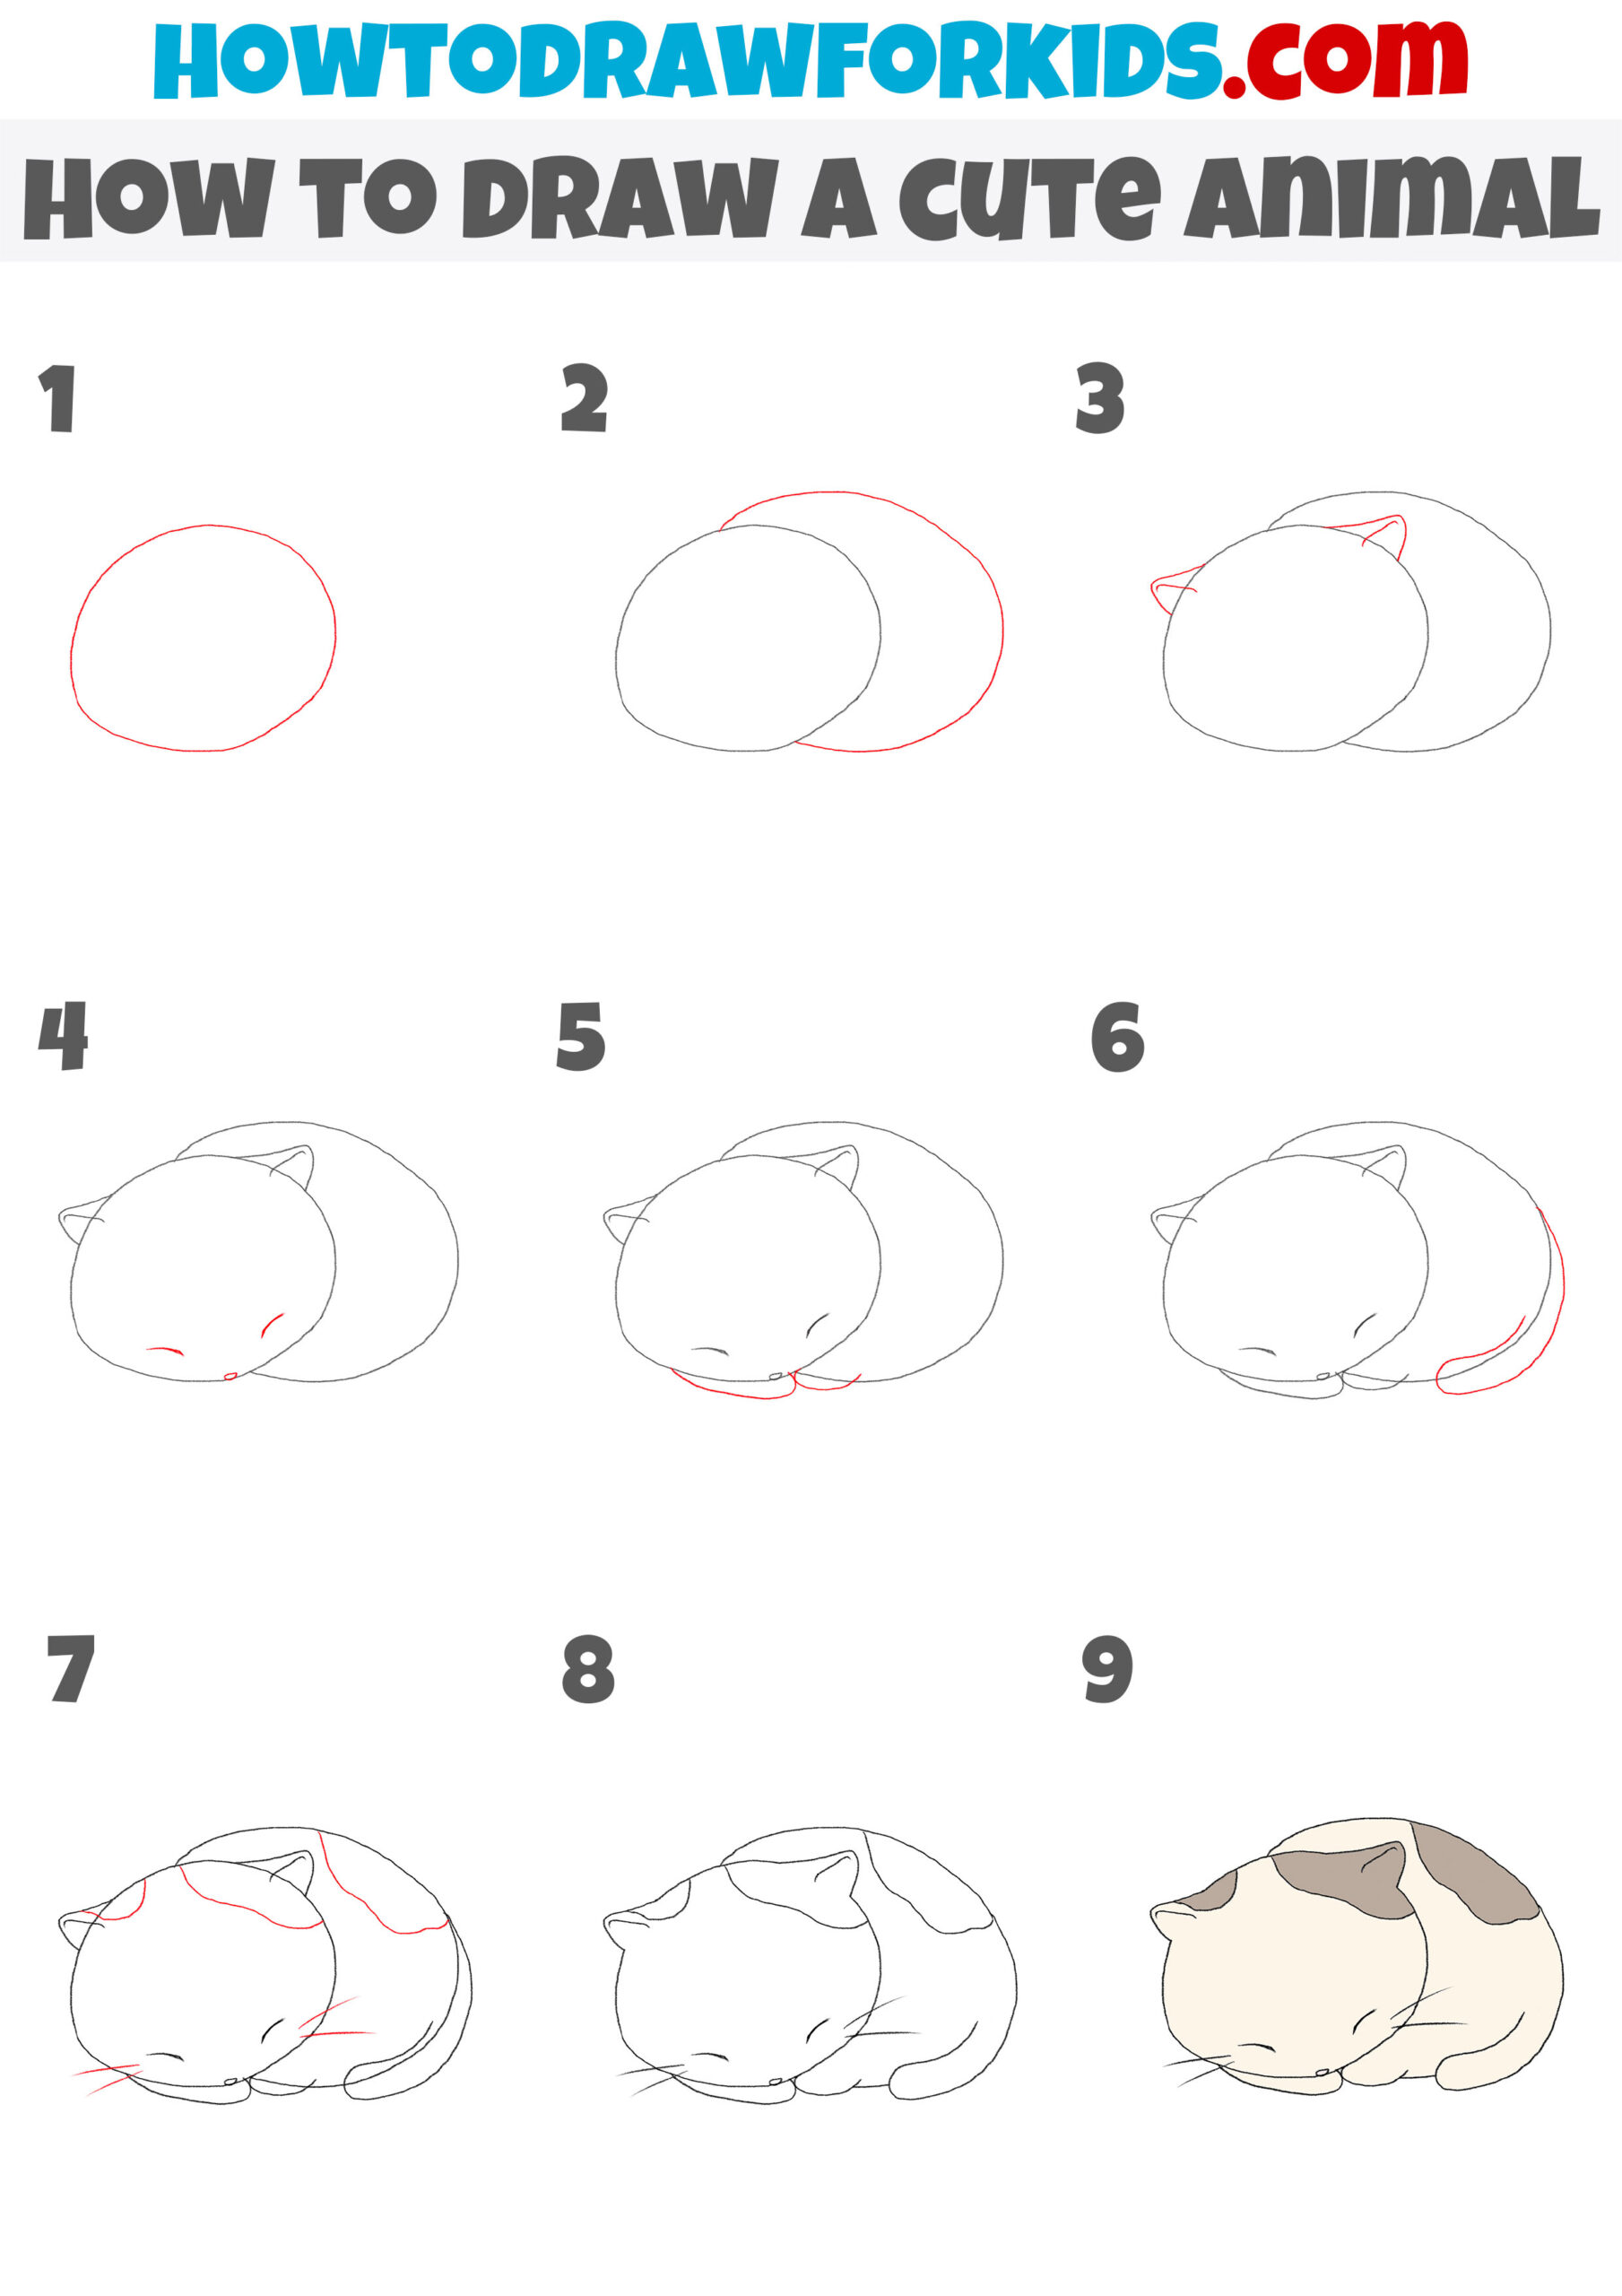 How to Draw a Cute Animal Step by Step - Easy Drawing Tutorial